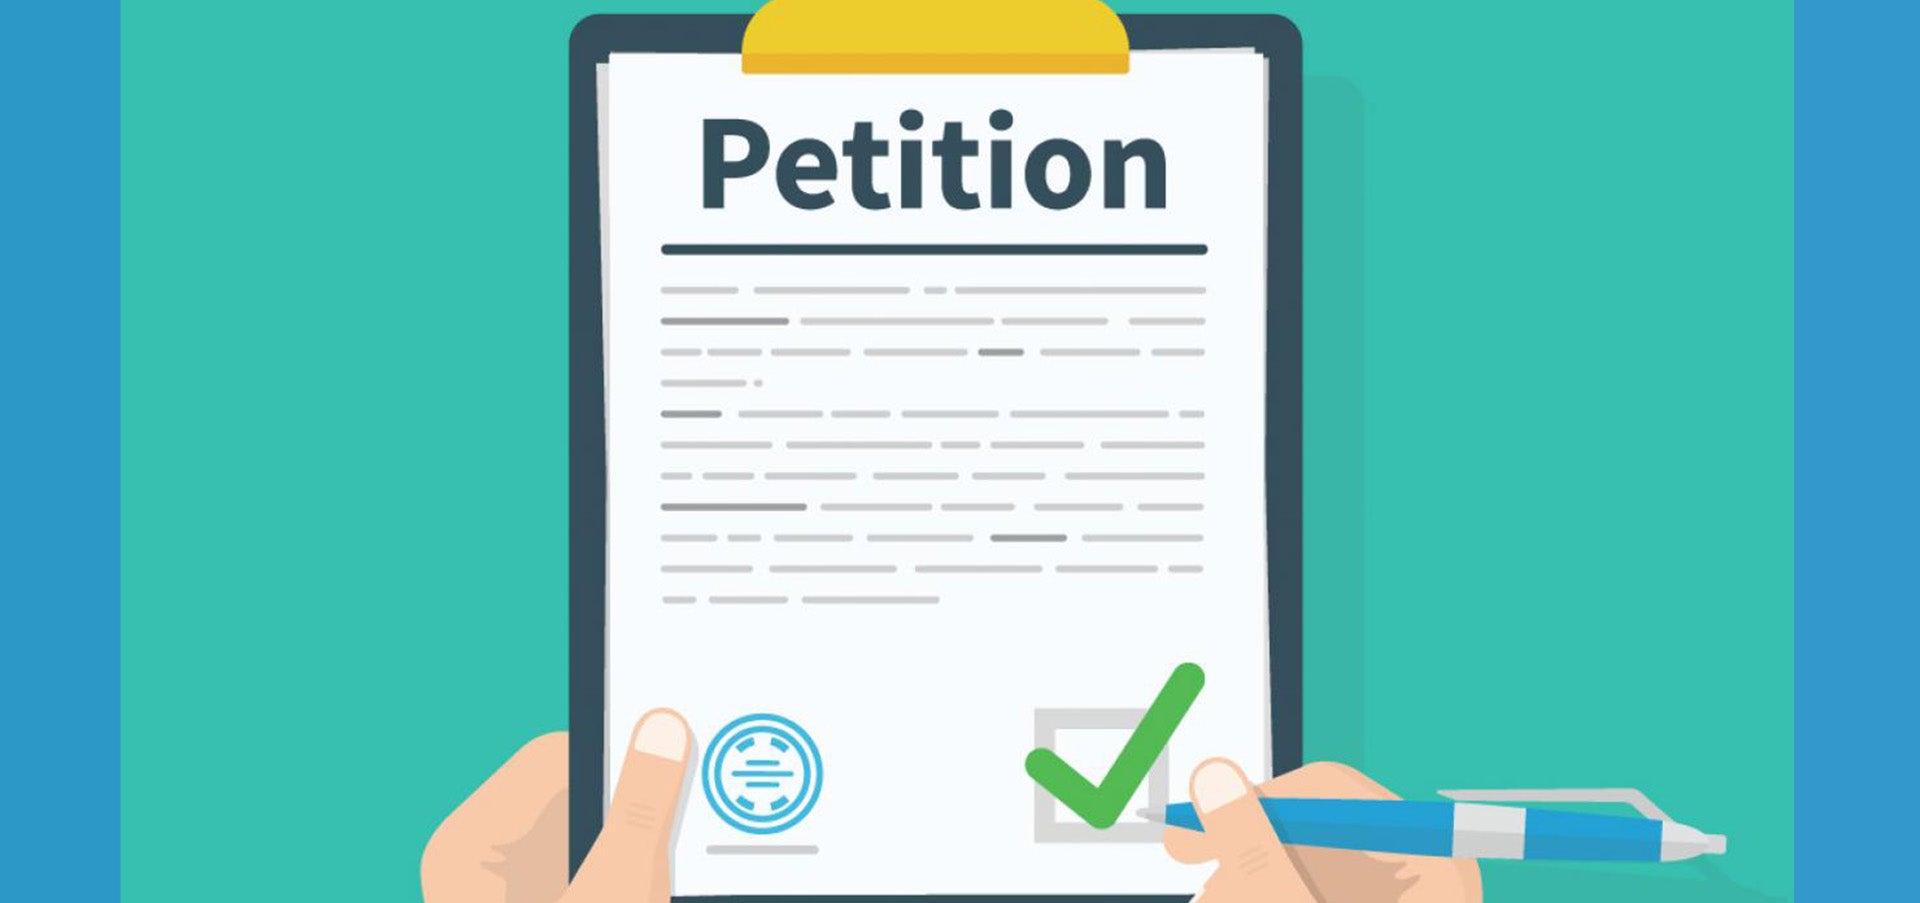 Cartoon of a petition